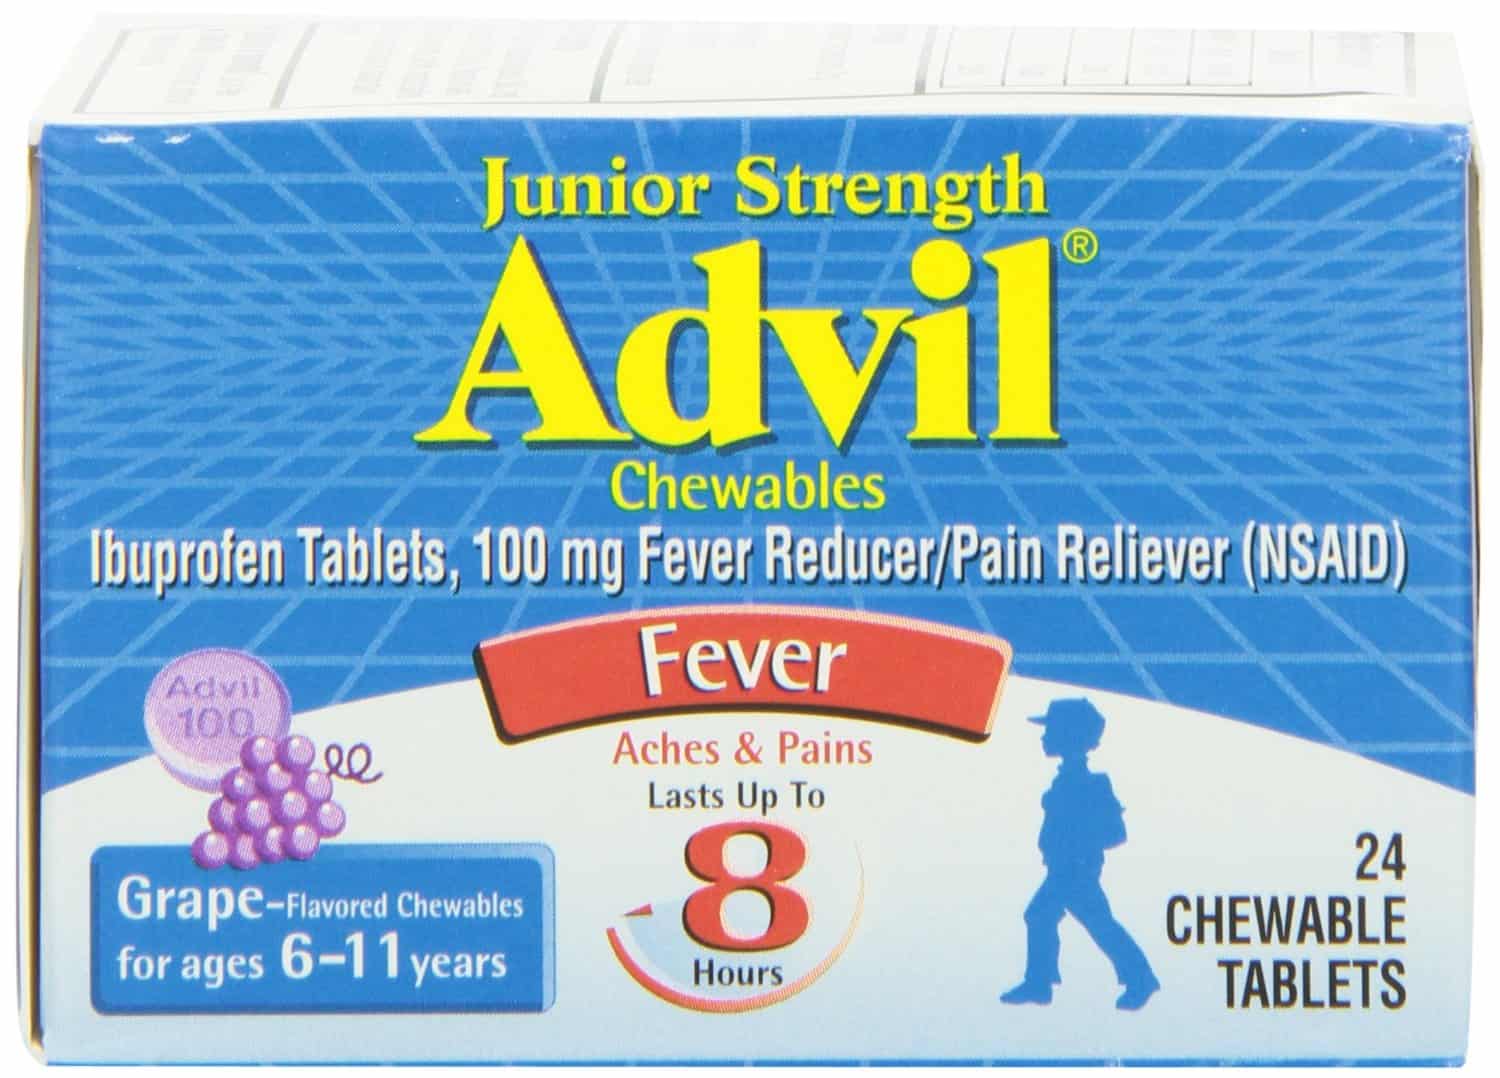 50+ Aspartame-Containing Products To Avoid. Advil chewables,